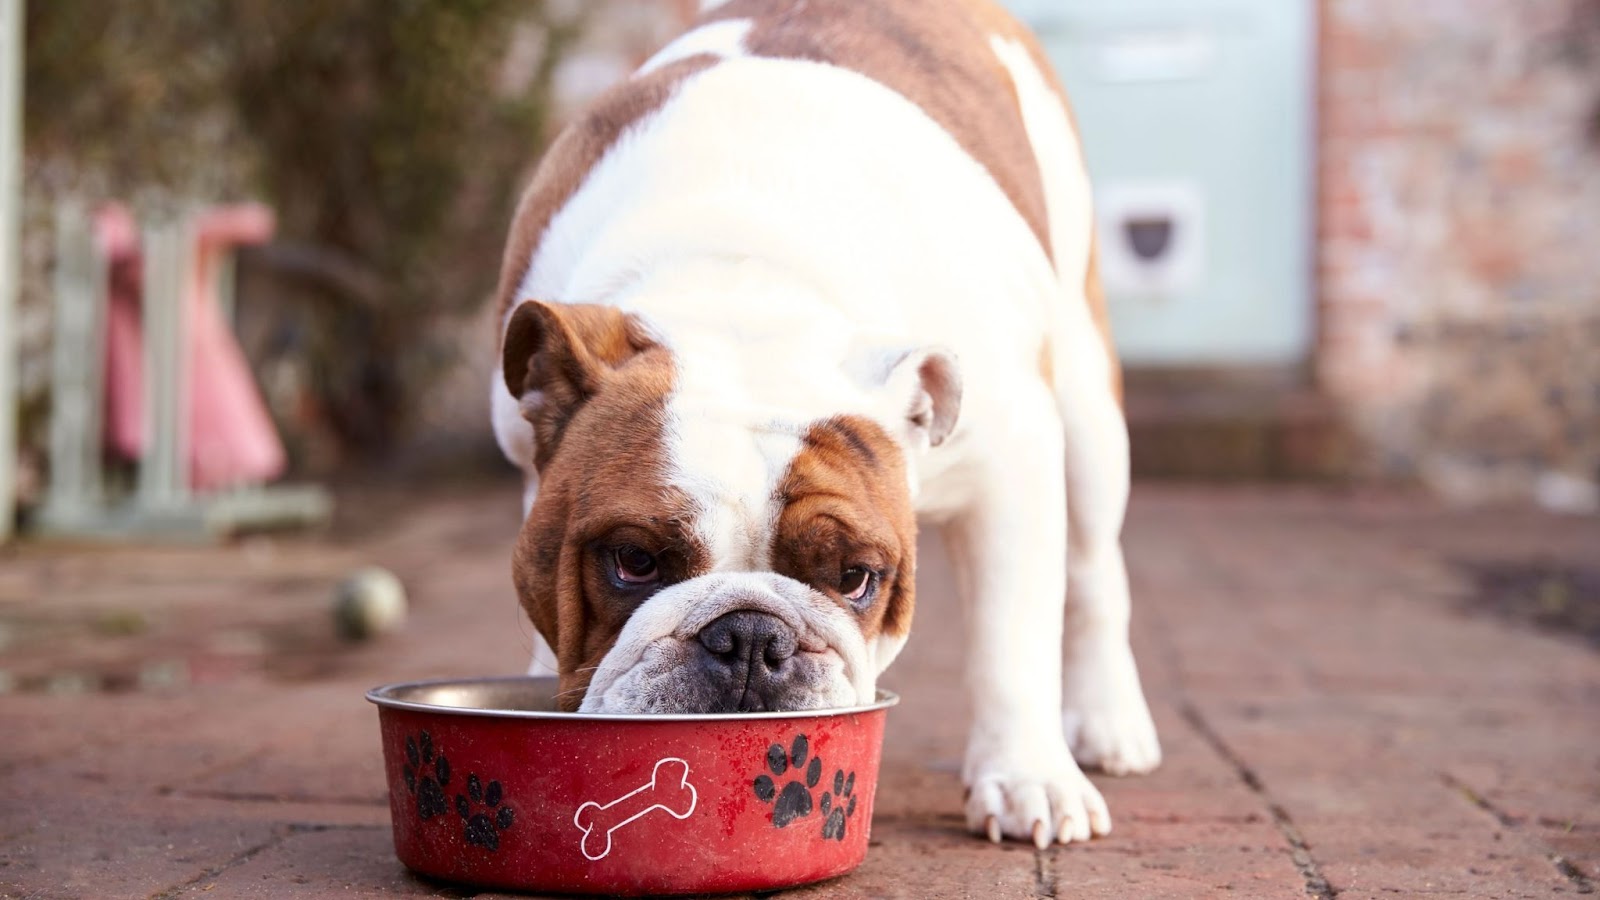 Bulldog eating food from red bowl diet may cause bad breath in dog